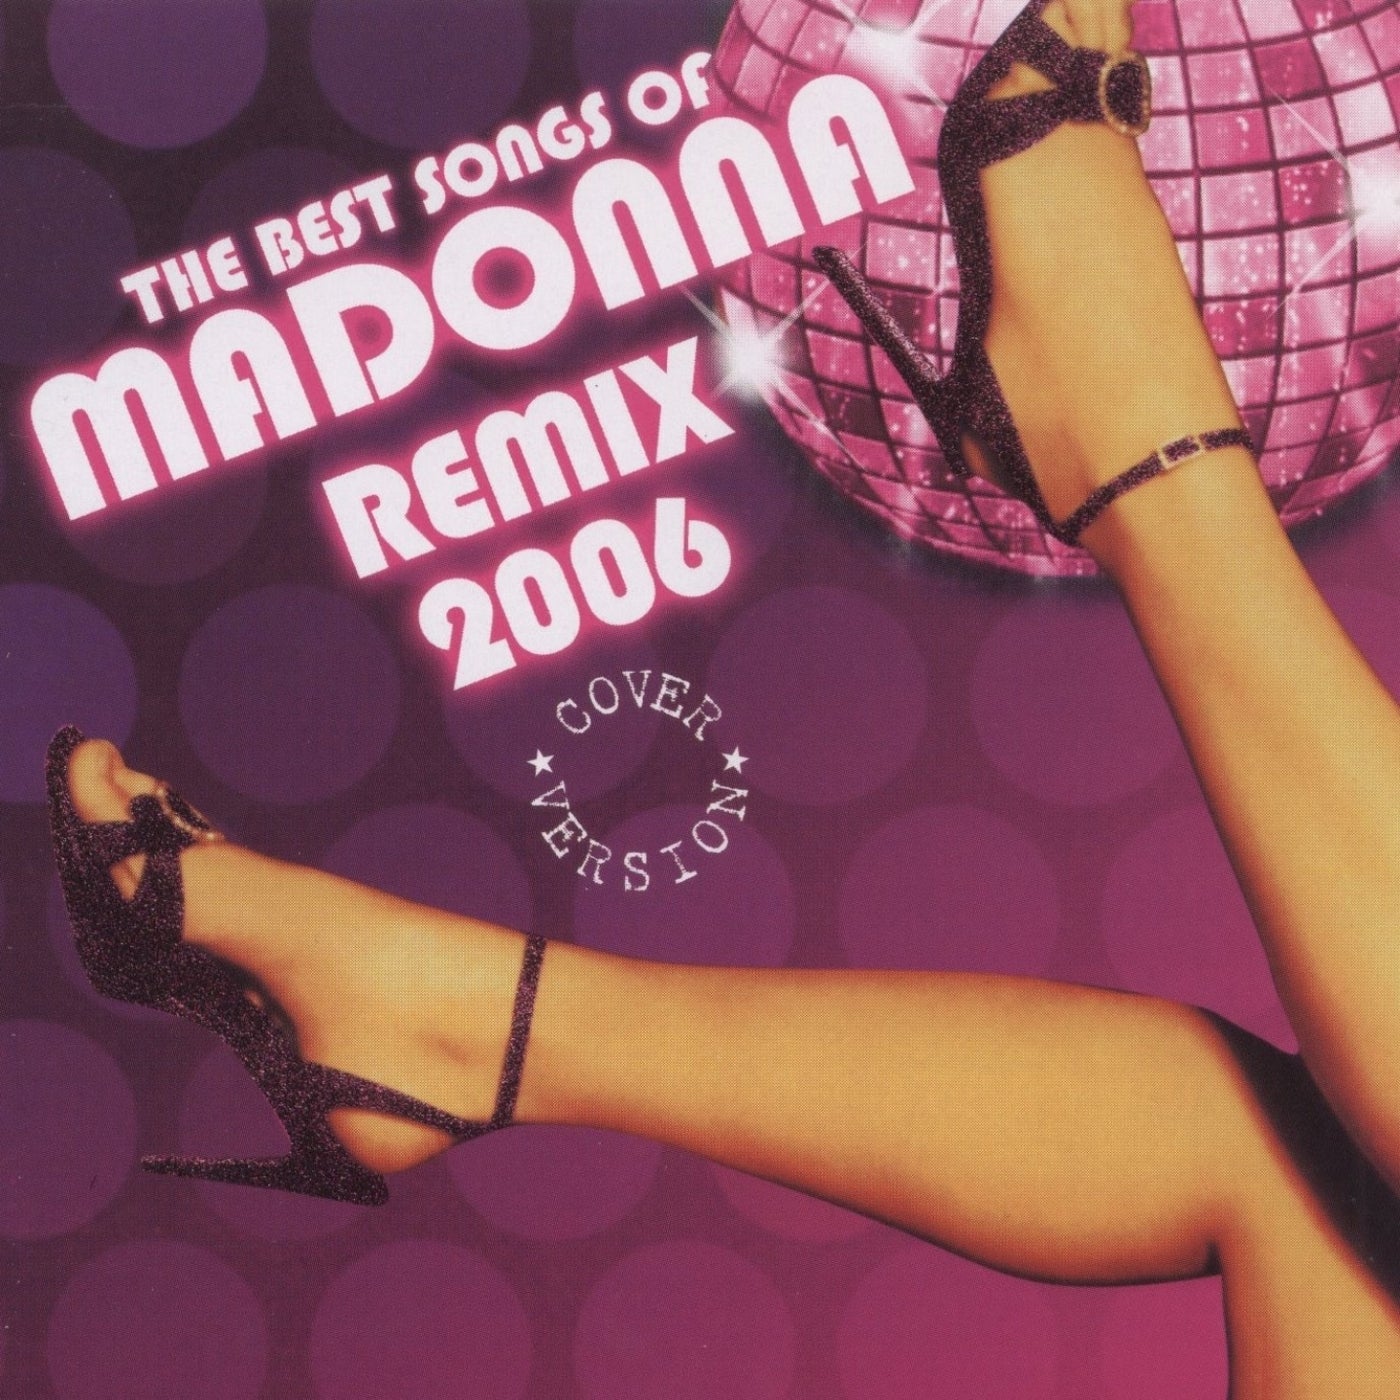 The Best Songs Of Madonna Remix 2006 by Cristy, Mary Trey, Marry